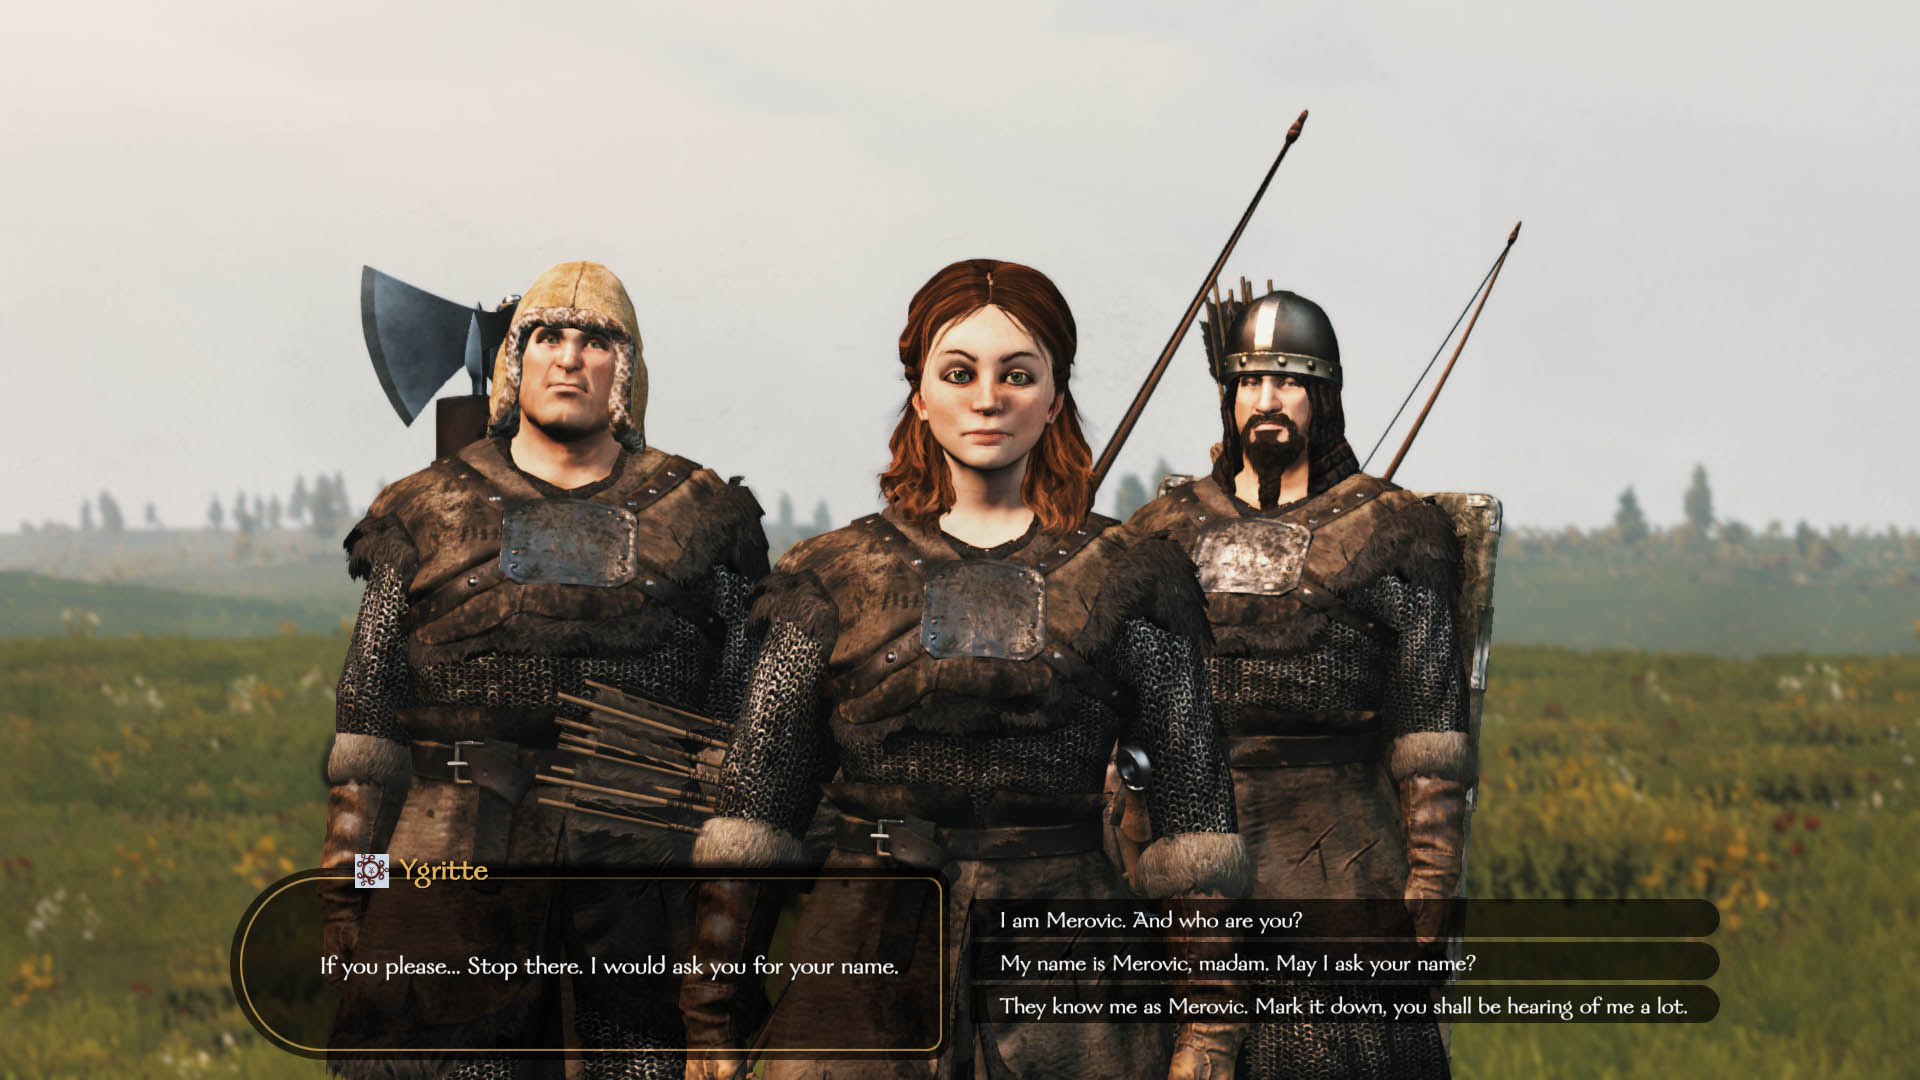 Mount blade 2 bannerlord мод игры престолов. Mount and Blade 2 Bannerlord. Mount and Blade 2 Bannerlord амазонки. Mount and Blade 2 Realm of Thrones.